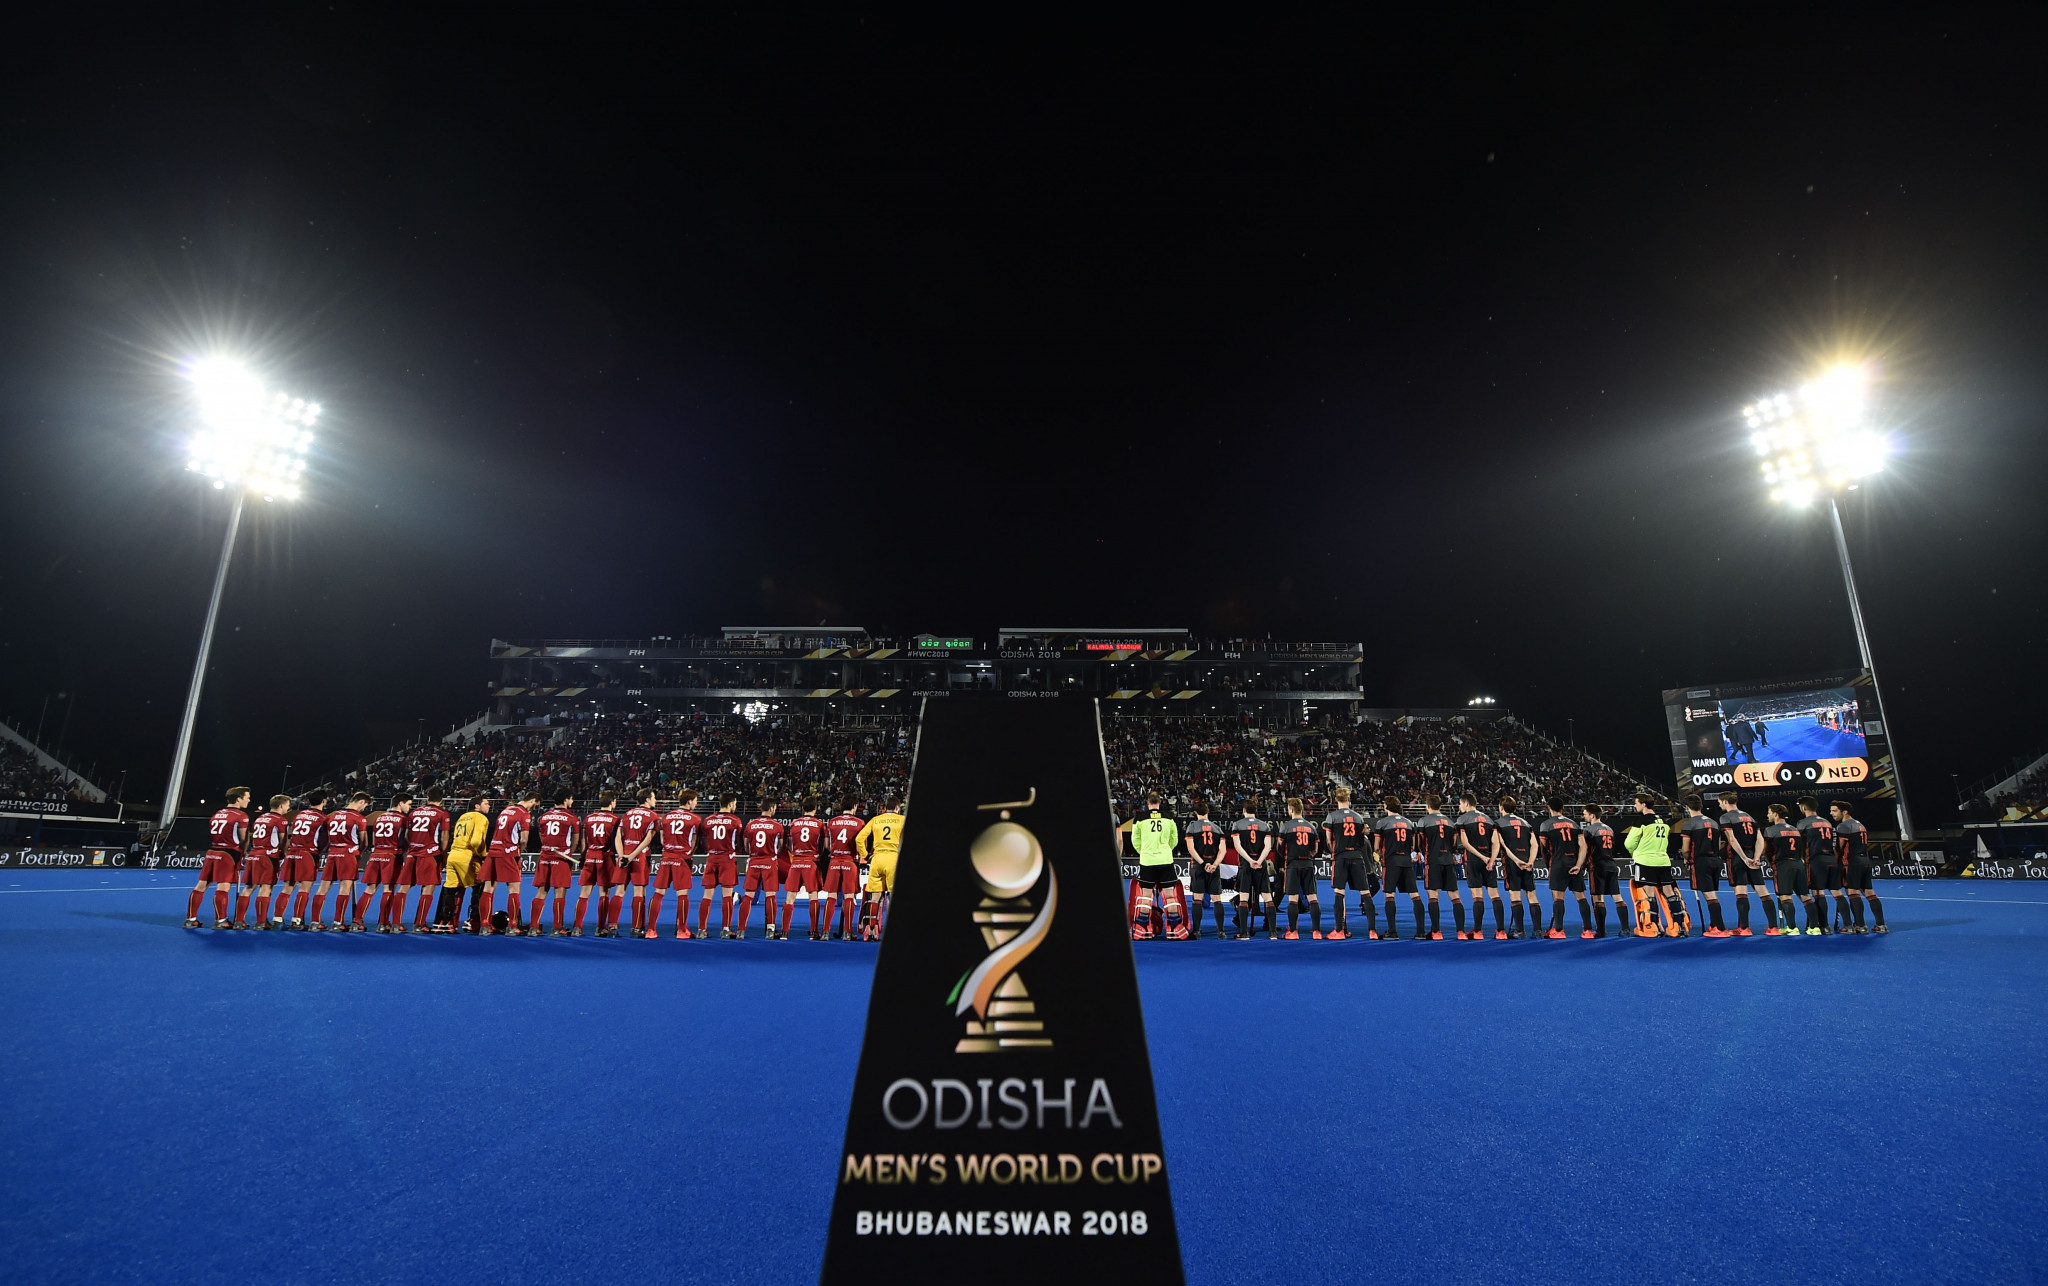 India will host the 2023 Men's World Cup © Getty Images